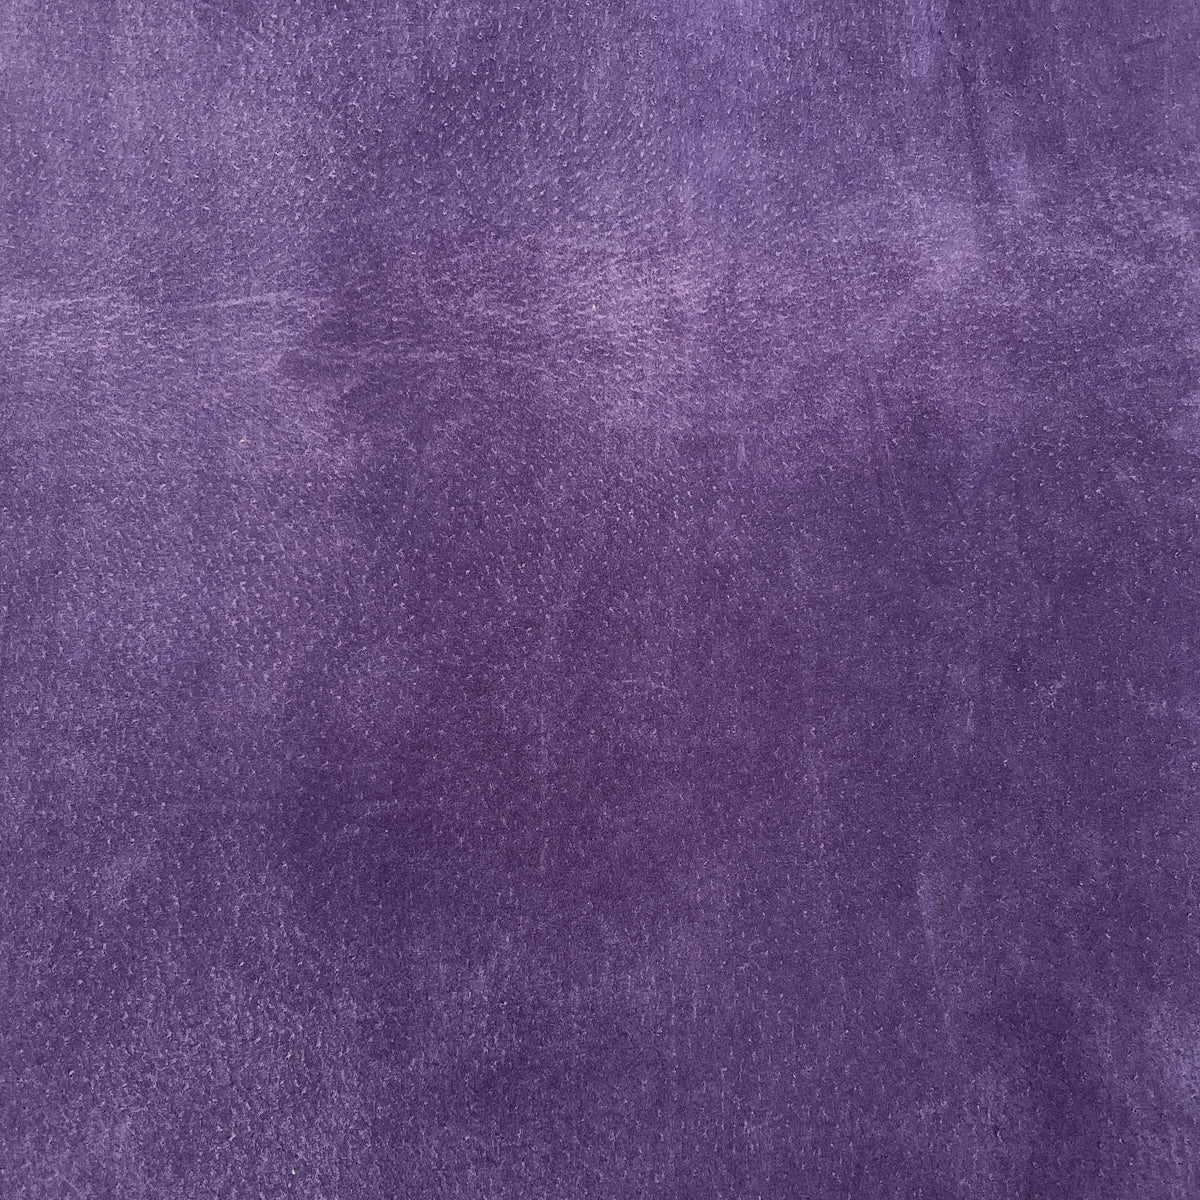 Pig Skin Suede | Purple | 0.6 mm | 8 sq.ft | From $25 ea.